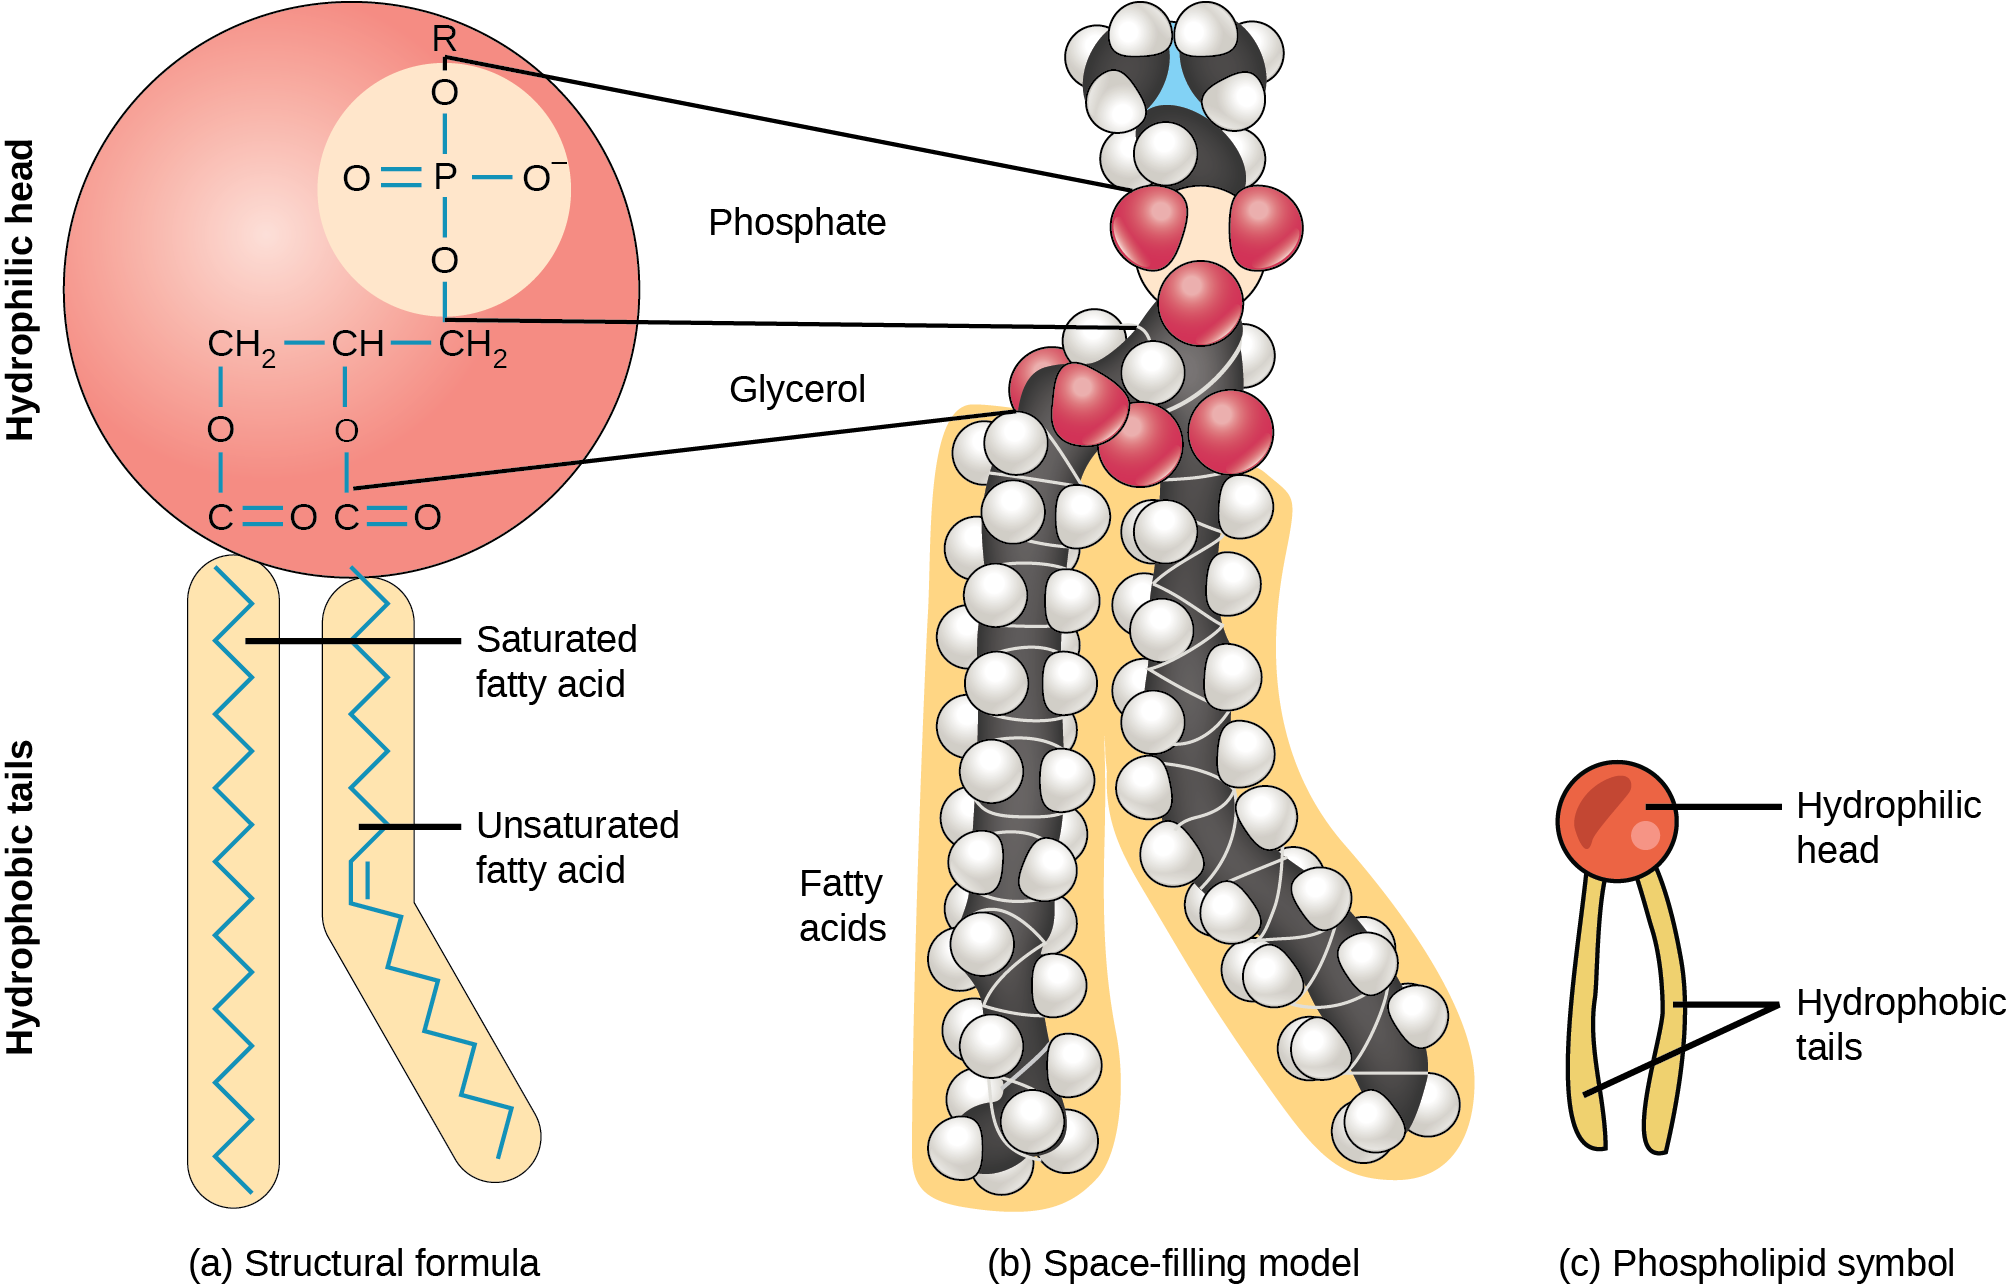 The molecular structure of a phospholipid is shown. It consists of two fatty acids attached to the first and second carbons in glycerol, and a phosphate group attached to the third position. The phosphate group may be further modified by addition of another molecule to one of its oxygens. Two molecules that may modify the phosphate group, choline and serine, are shown. Choline consists of a two-carbon chain with a hydroxy group attached to one end and a nitrogen attached to the other. The nitrogen, in turn, has three methyl groups attached to it and has a charge of plus one. Serine consists of a two-carbon chain with a hydroxyl group attached to one end. An amino group and a carboxyl group are attached to the other end.